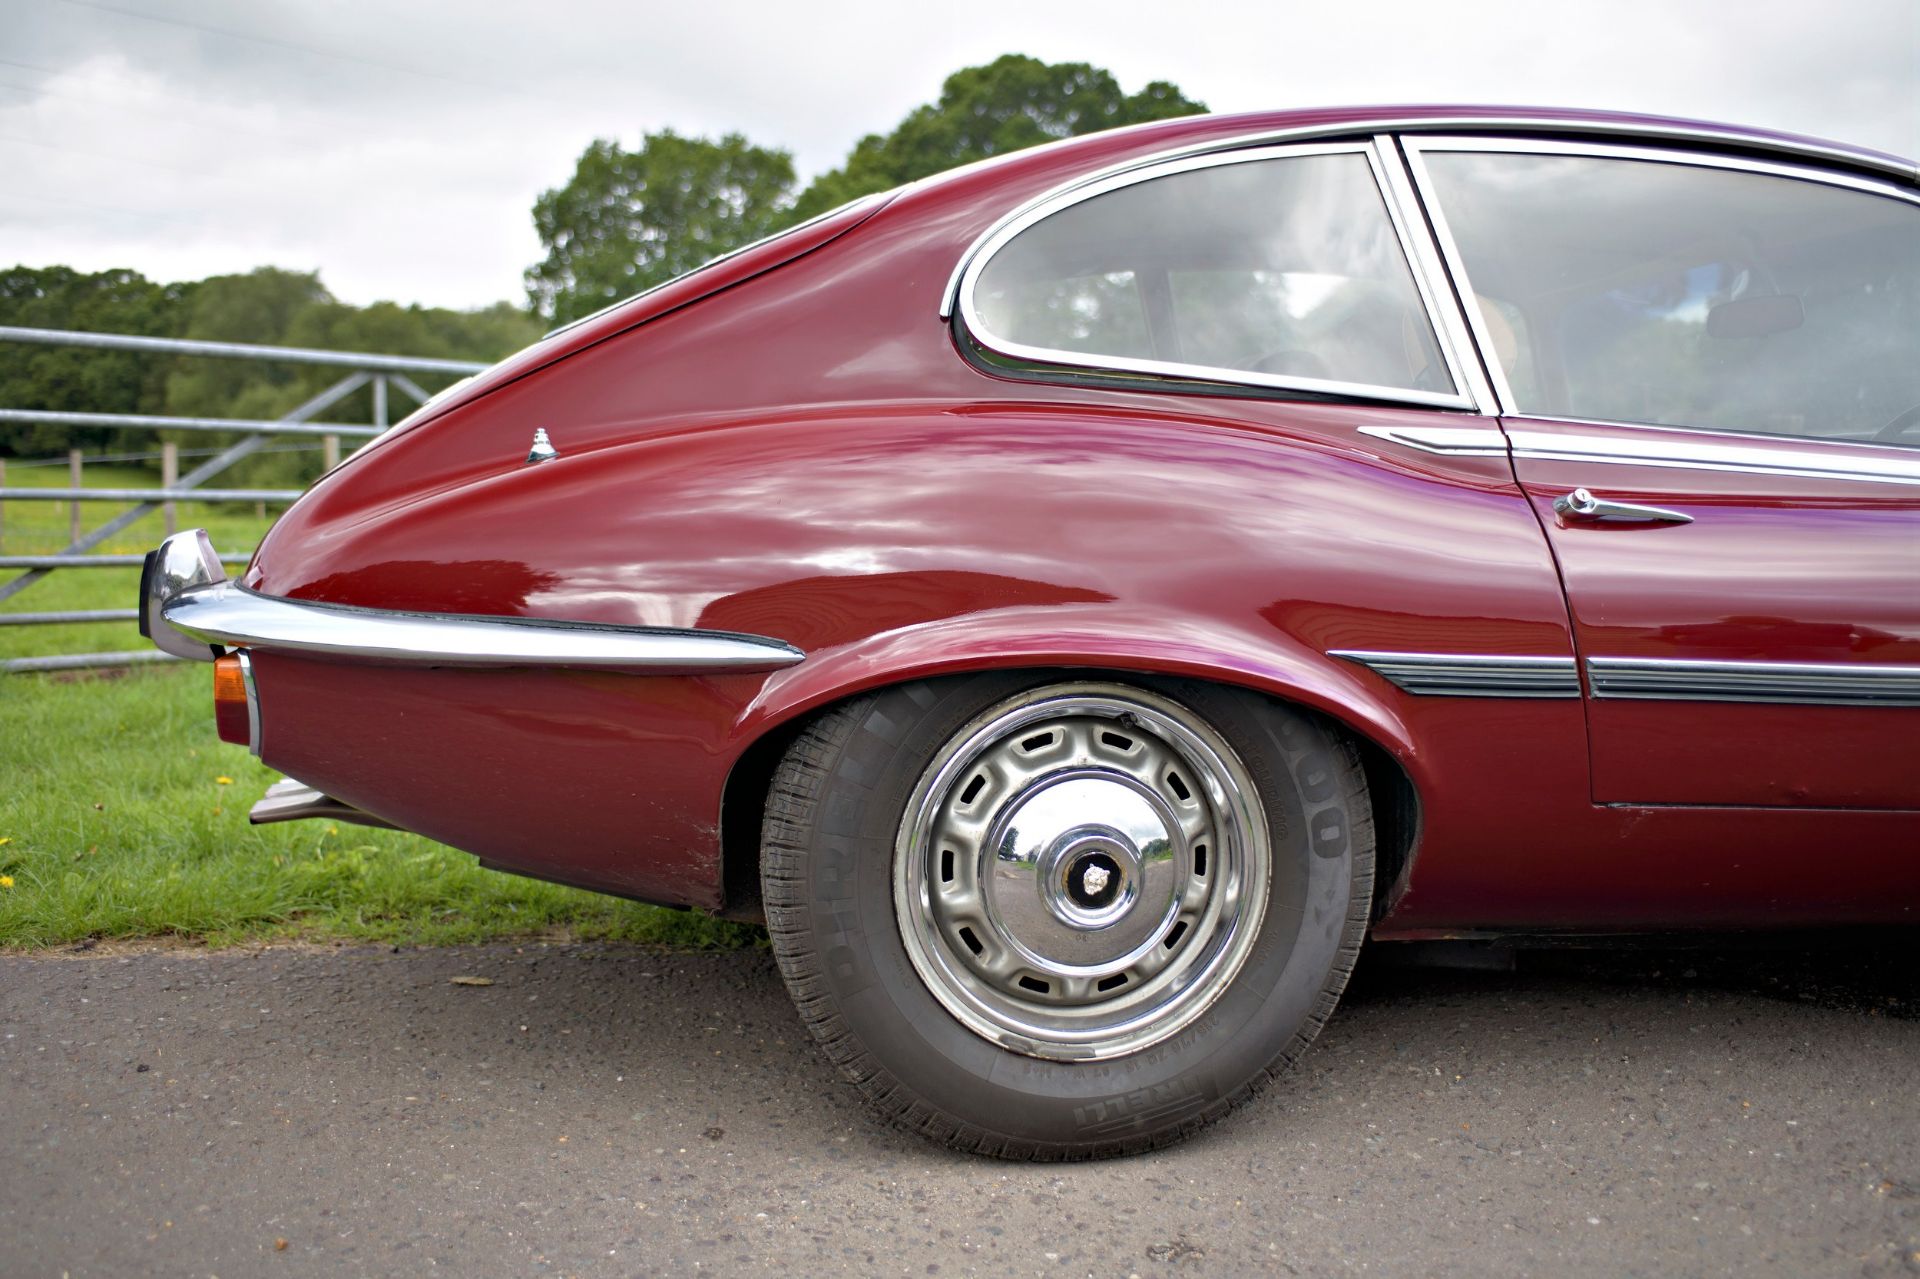 1972 JAGUAR E-TYPE SERIES III FIXED HEAD COUPE Registration: JAG 947 - Image 14 of 36